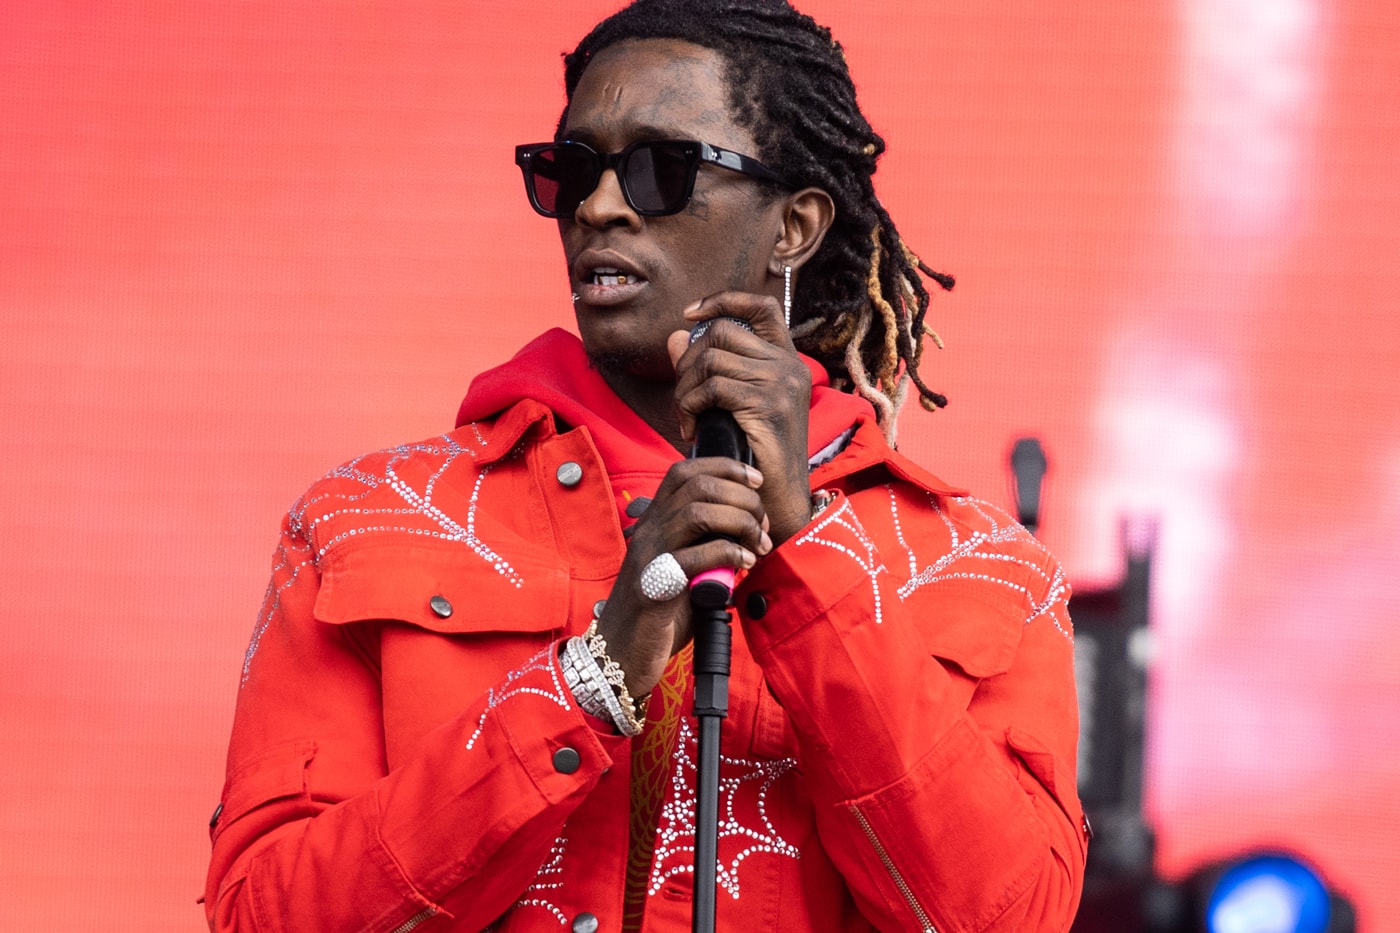 young-thug-no-my-name-is-jeffery-travis-scott-interview